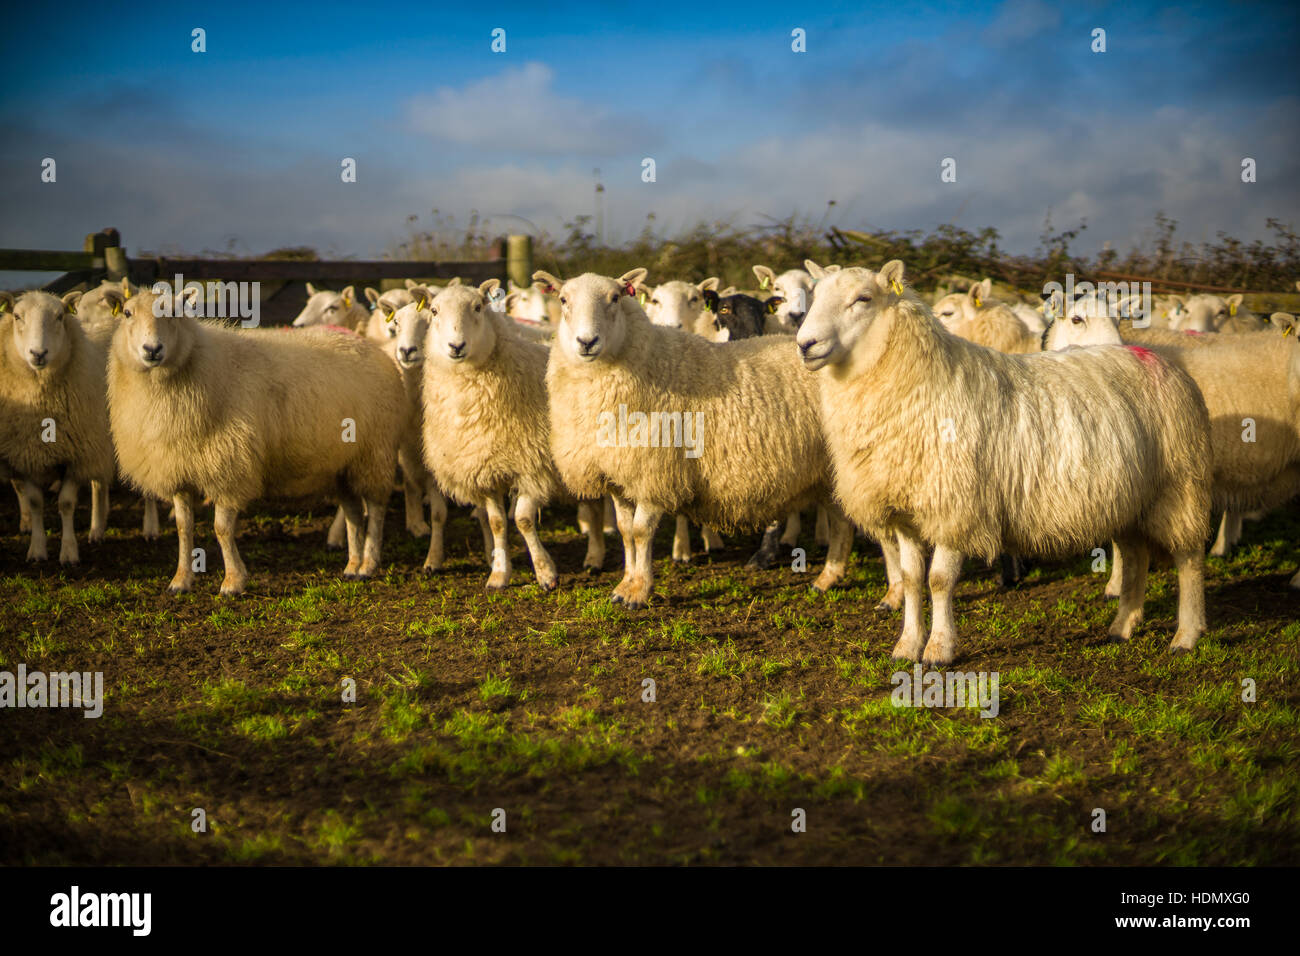 A flock of sheep wait nervously in a pen as the farmer prepares to inspect them. Stock Photo